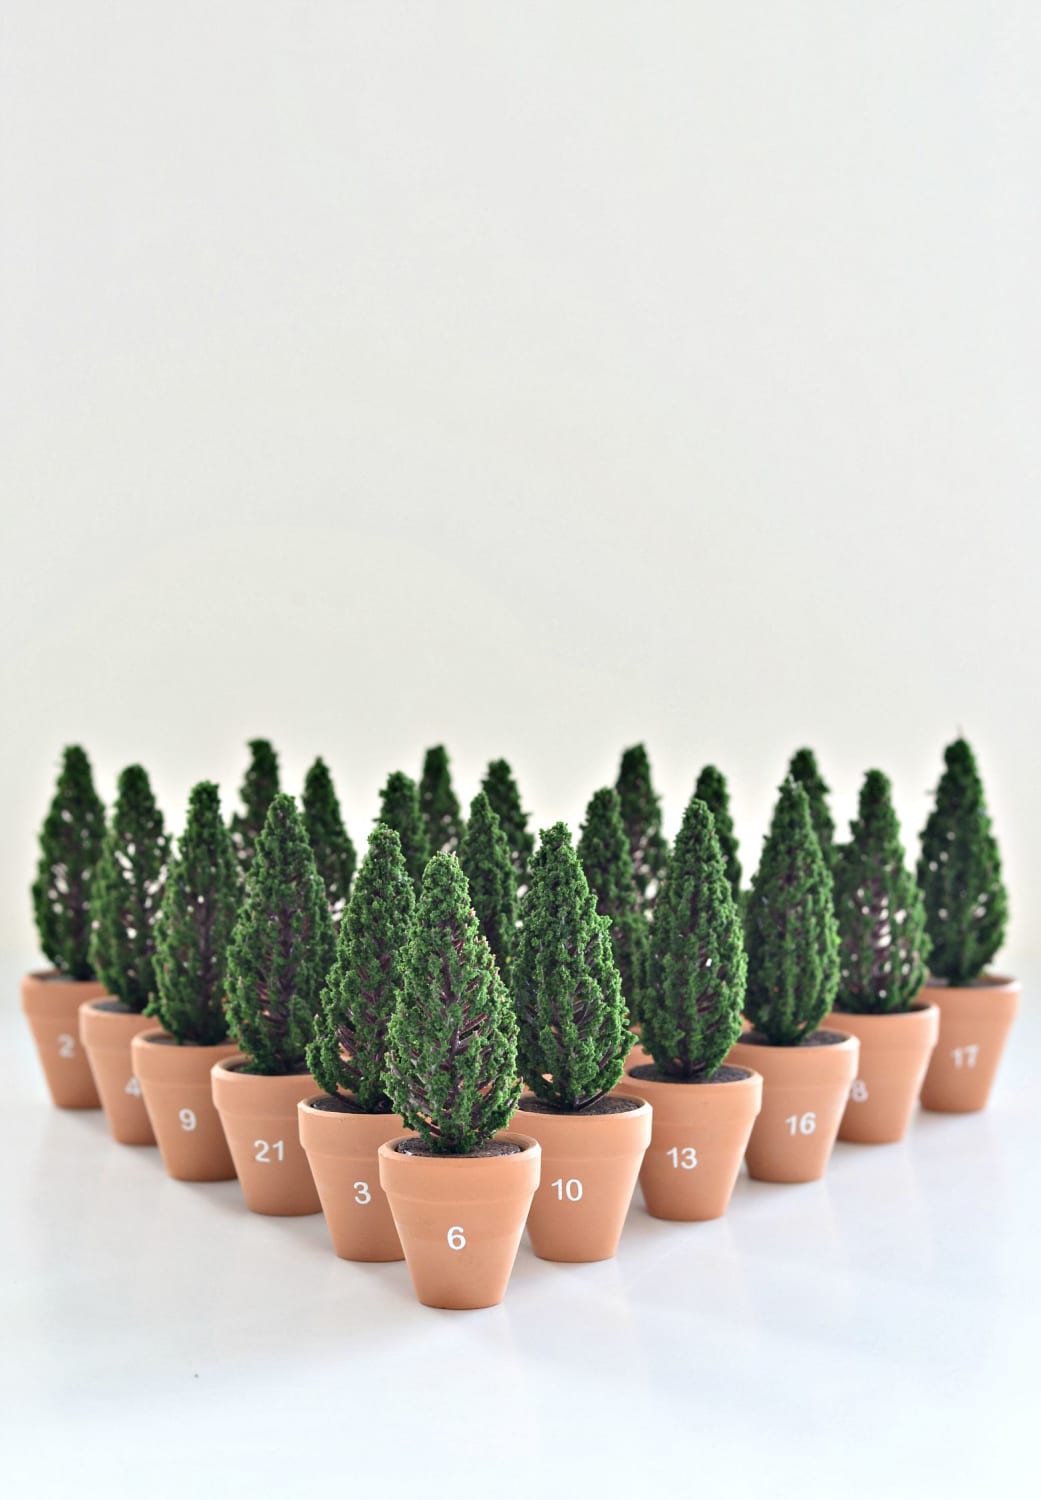 Planted! DIY Christmas advent calendar with mini planted trees